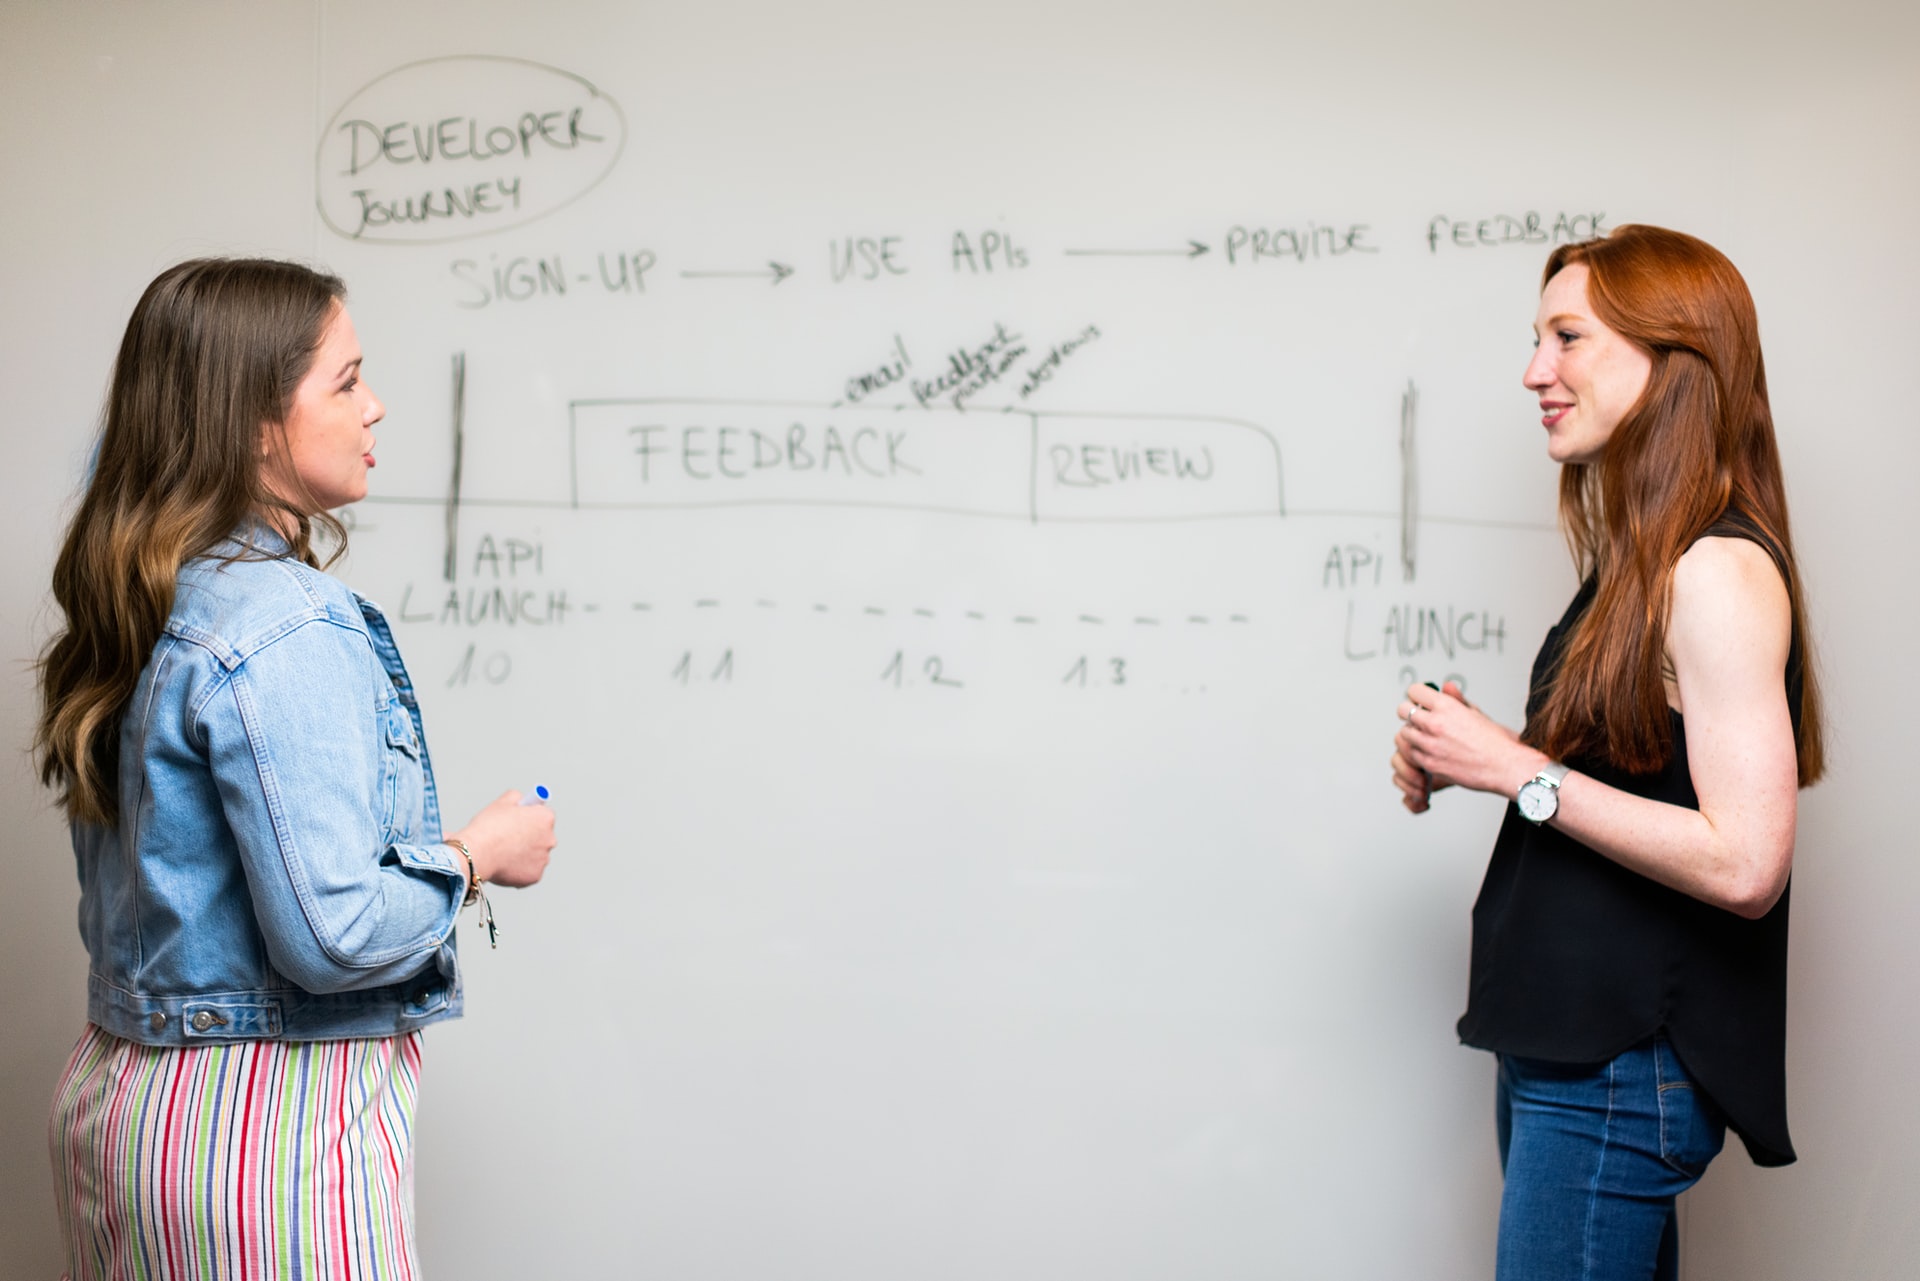 Two female engineers working at a whiteboard